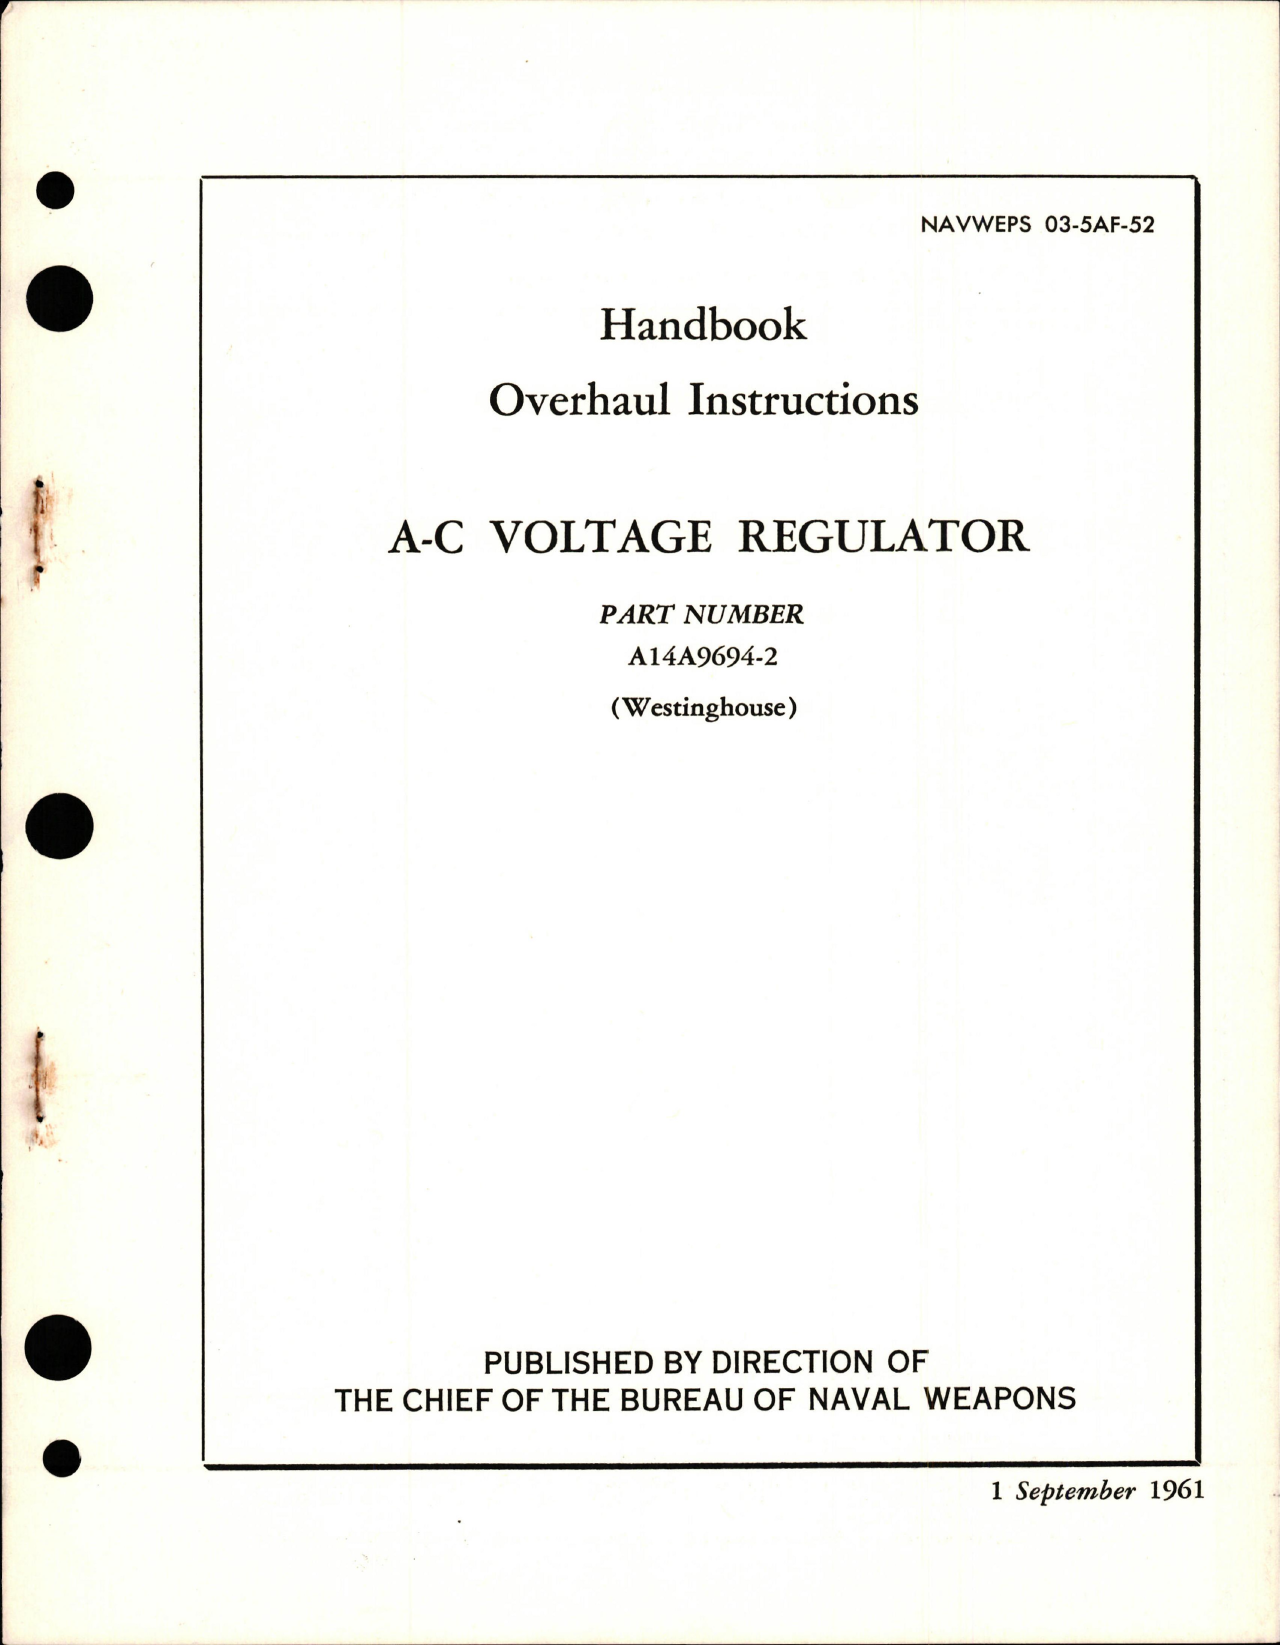 Sample page 1 from AirCorps Library document: Overhaul Instructions for A-C Voltage Regulator - Part A14A9694-2 